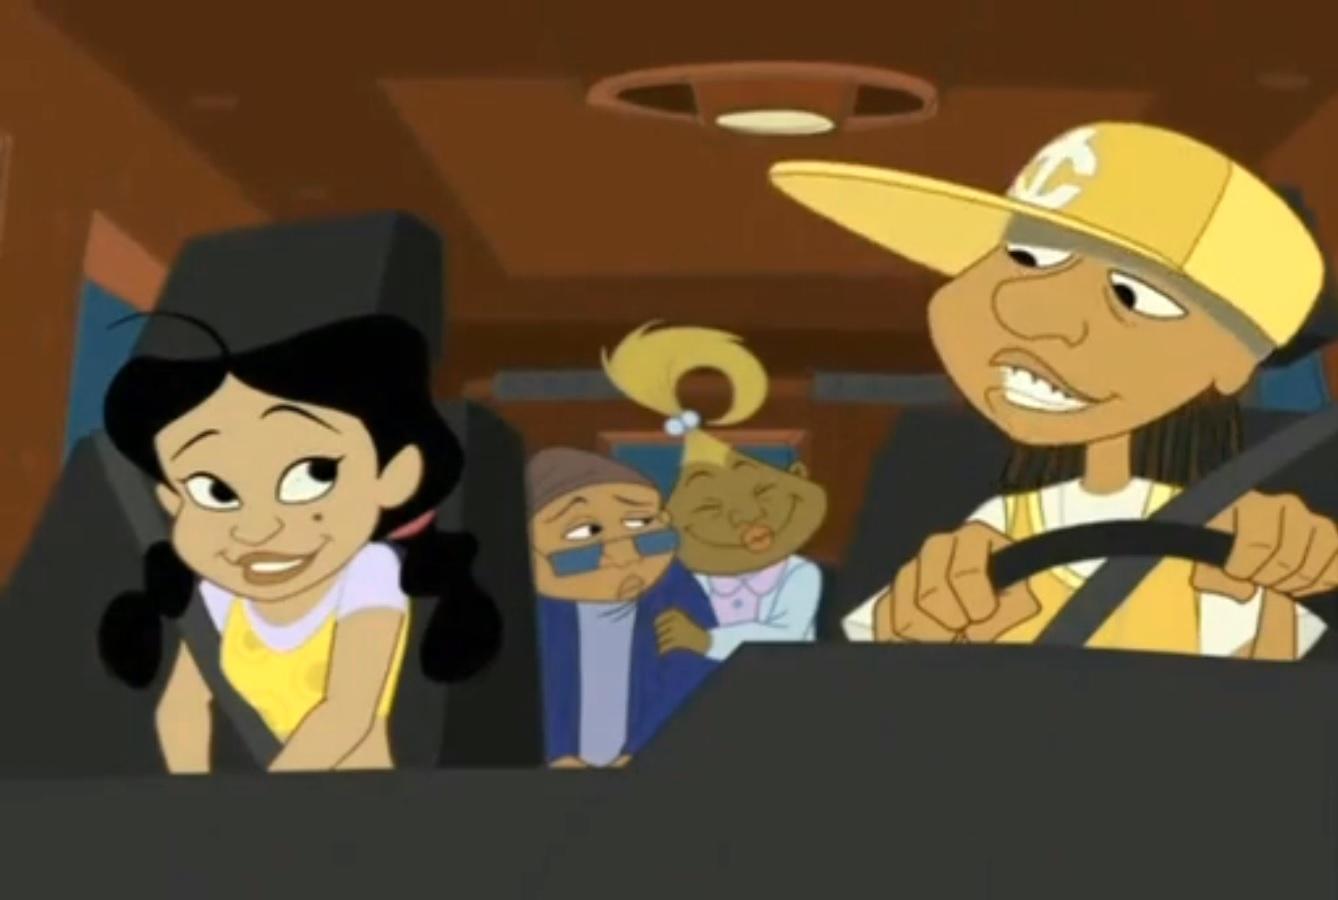 the proud family penny and 15 cent